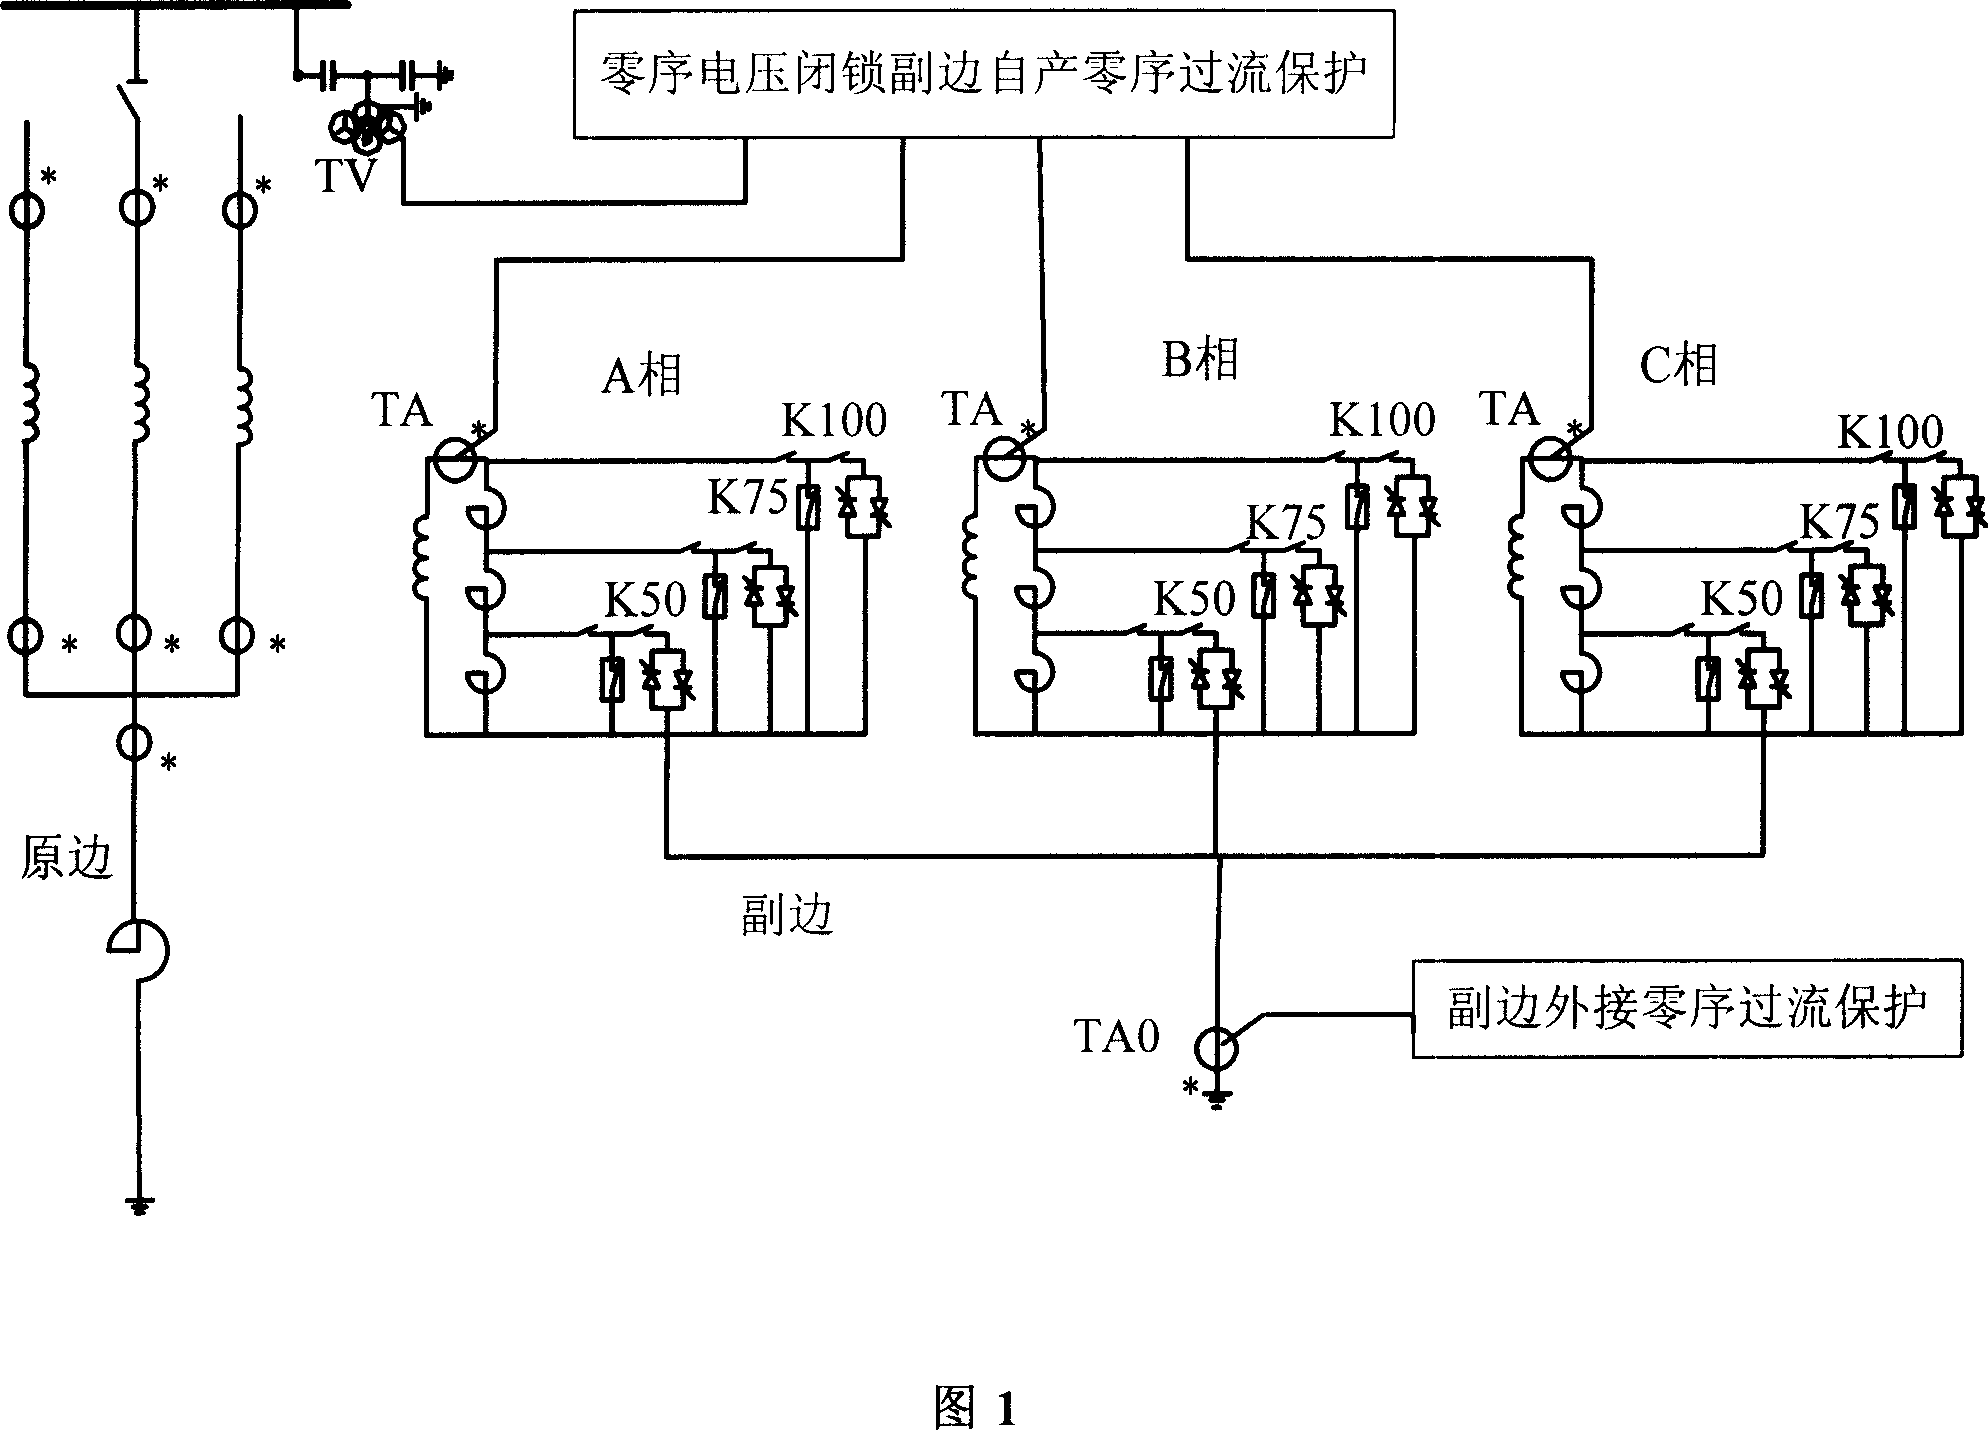 High-voltage AC. controllable parallel-connection reactor control winding zero-sequence protection method